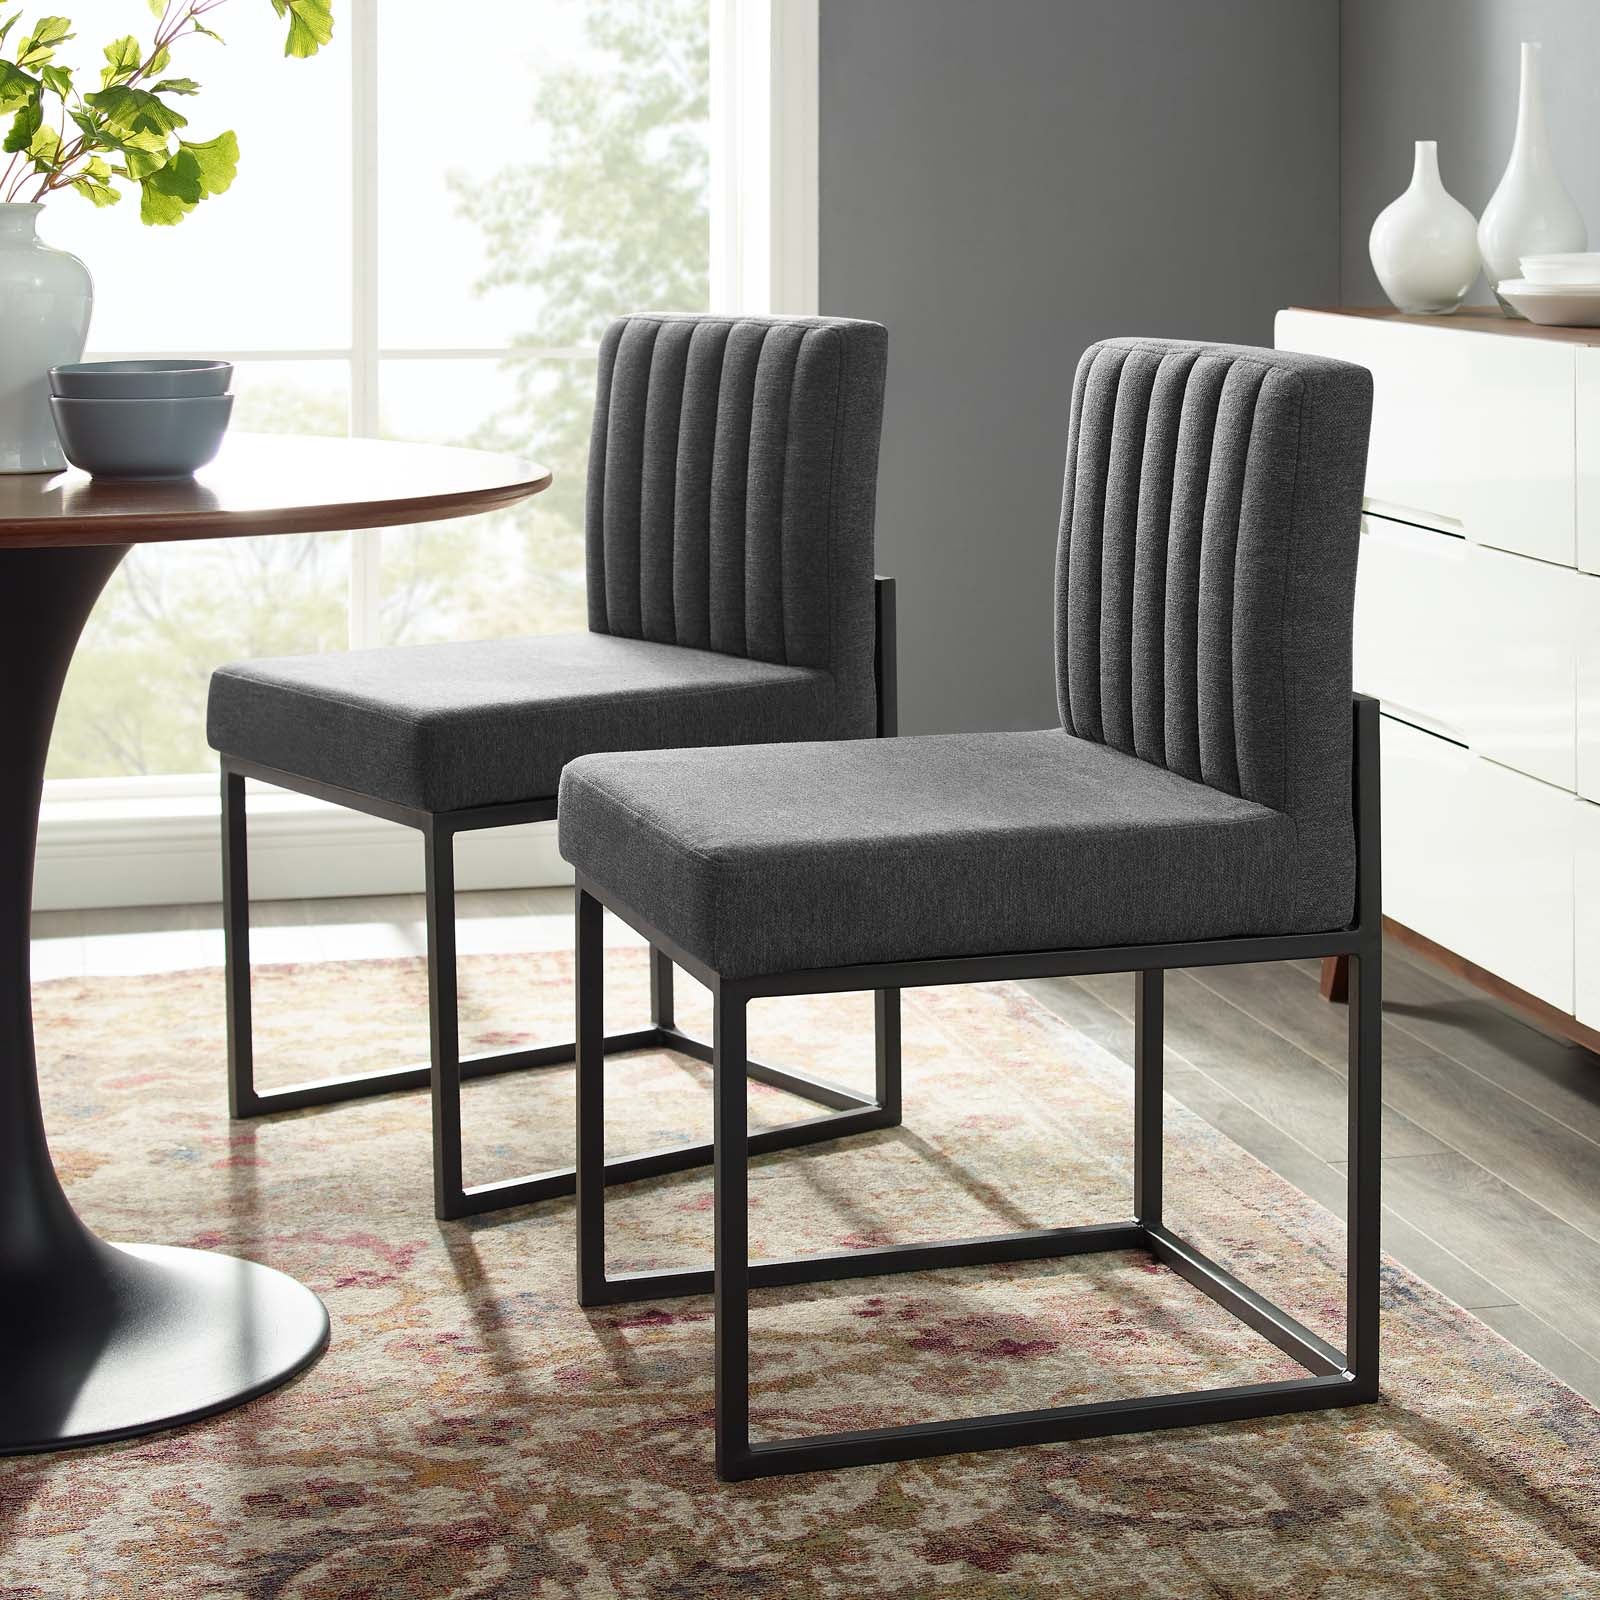 Carriage Dining Chair Upholstered Fabric Set of 2 - East Shore Modern Home Furnishings